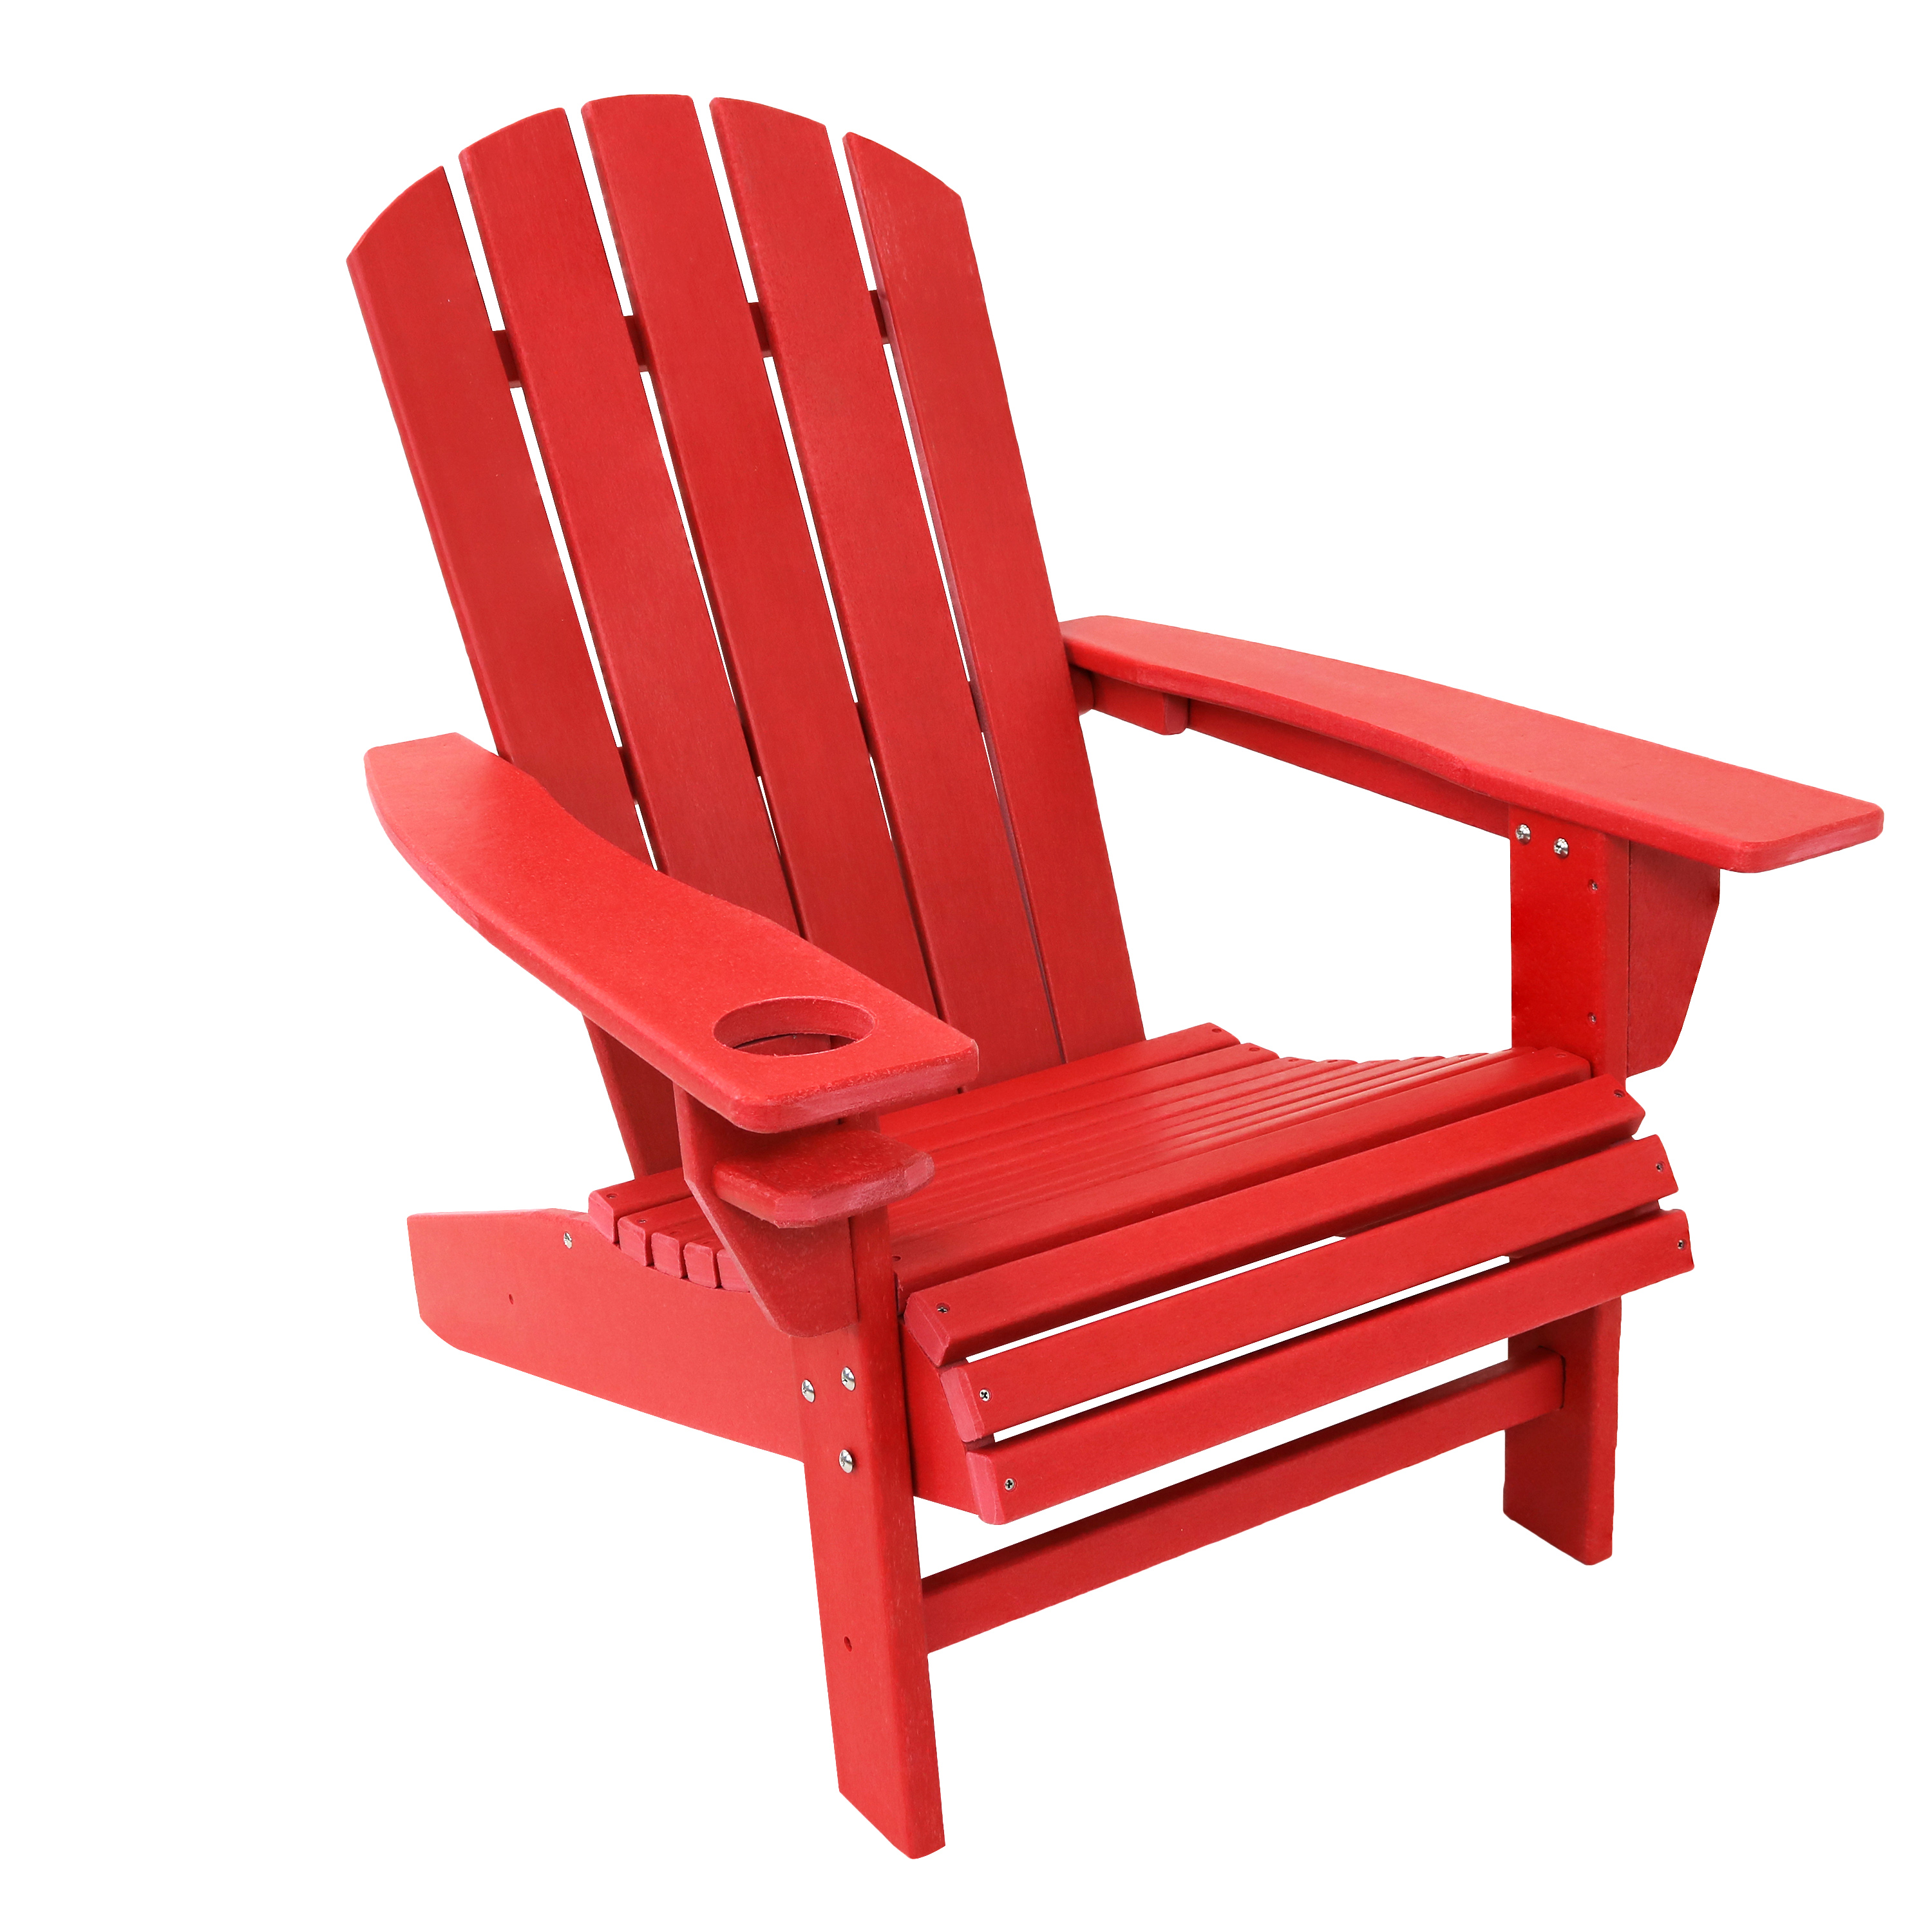 Sunnydaze All-Weather Outdoor Adirondack Chair with Drink Holder - Heavy Duty HDPE Weatherproof Patio Chair - Ideal for Lawn, Garden or Around the Firepit - Red - image 2 of 7